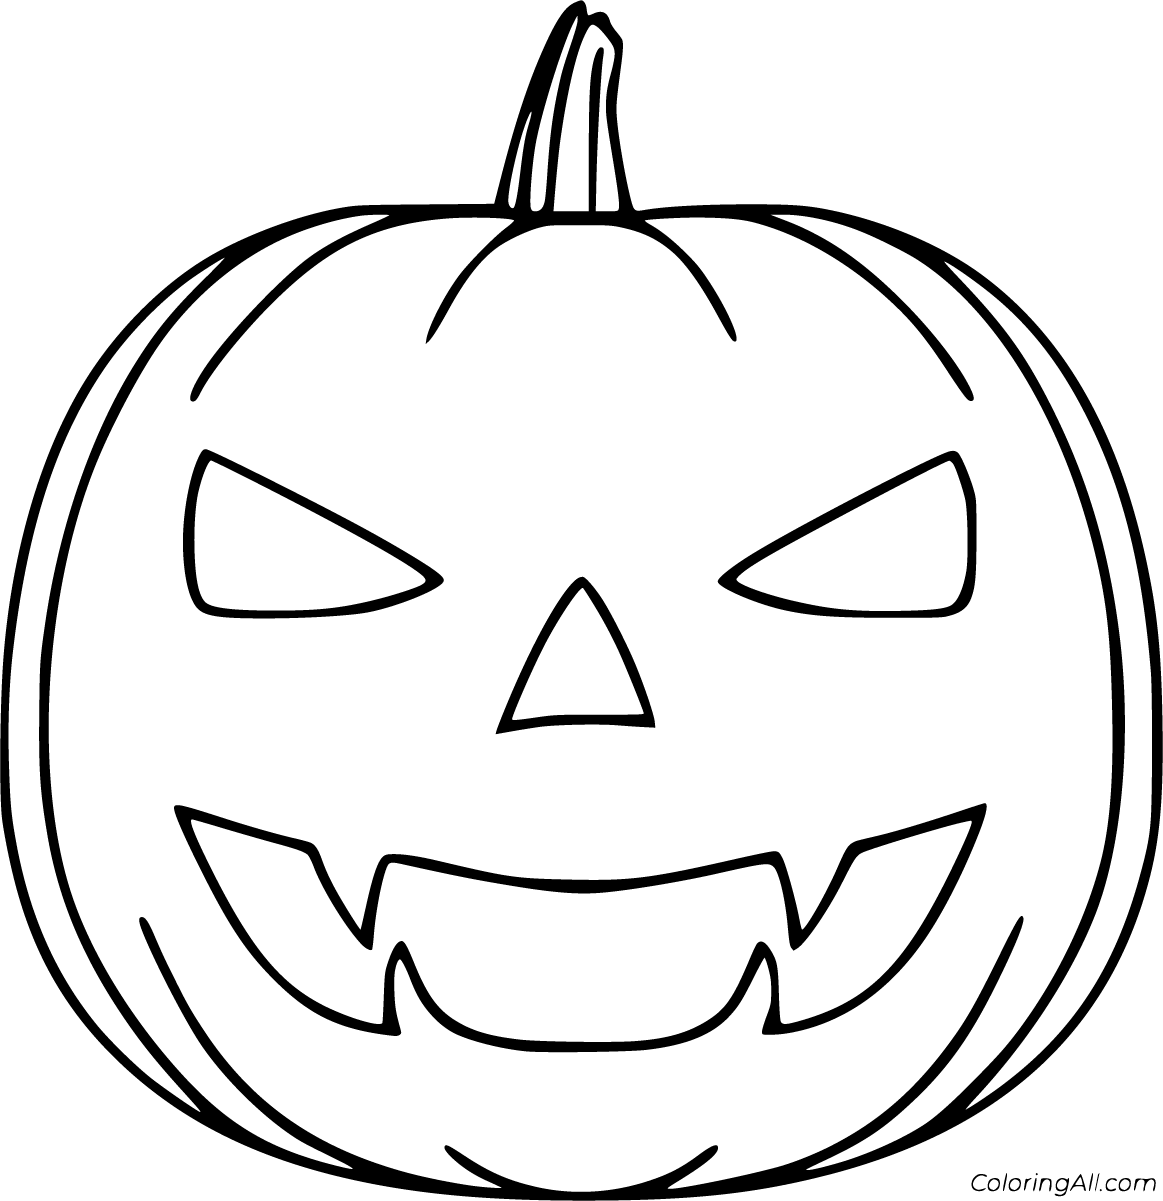 jack-o-lantern-coloring-pages-coloringall